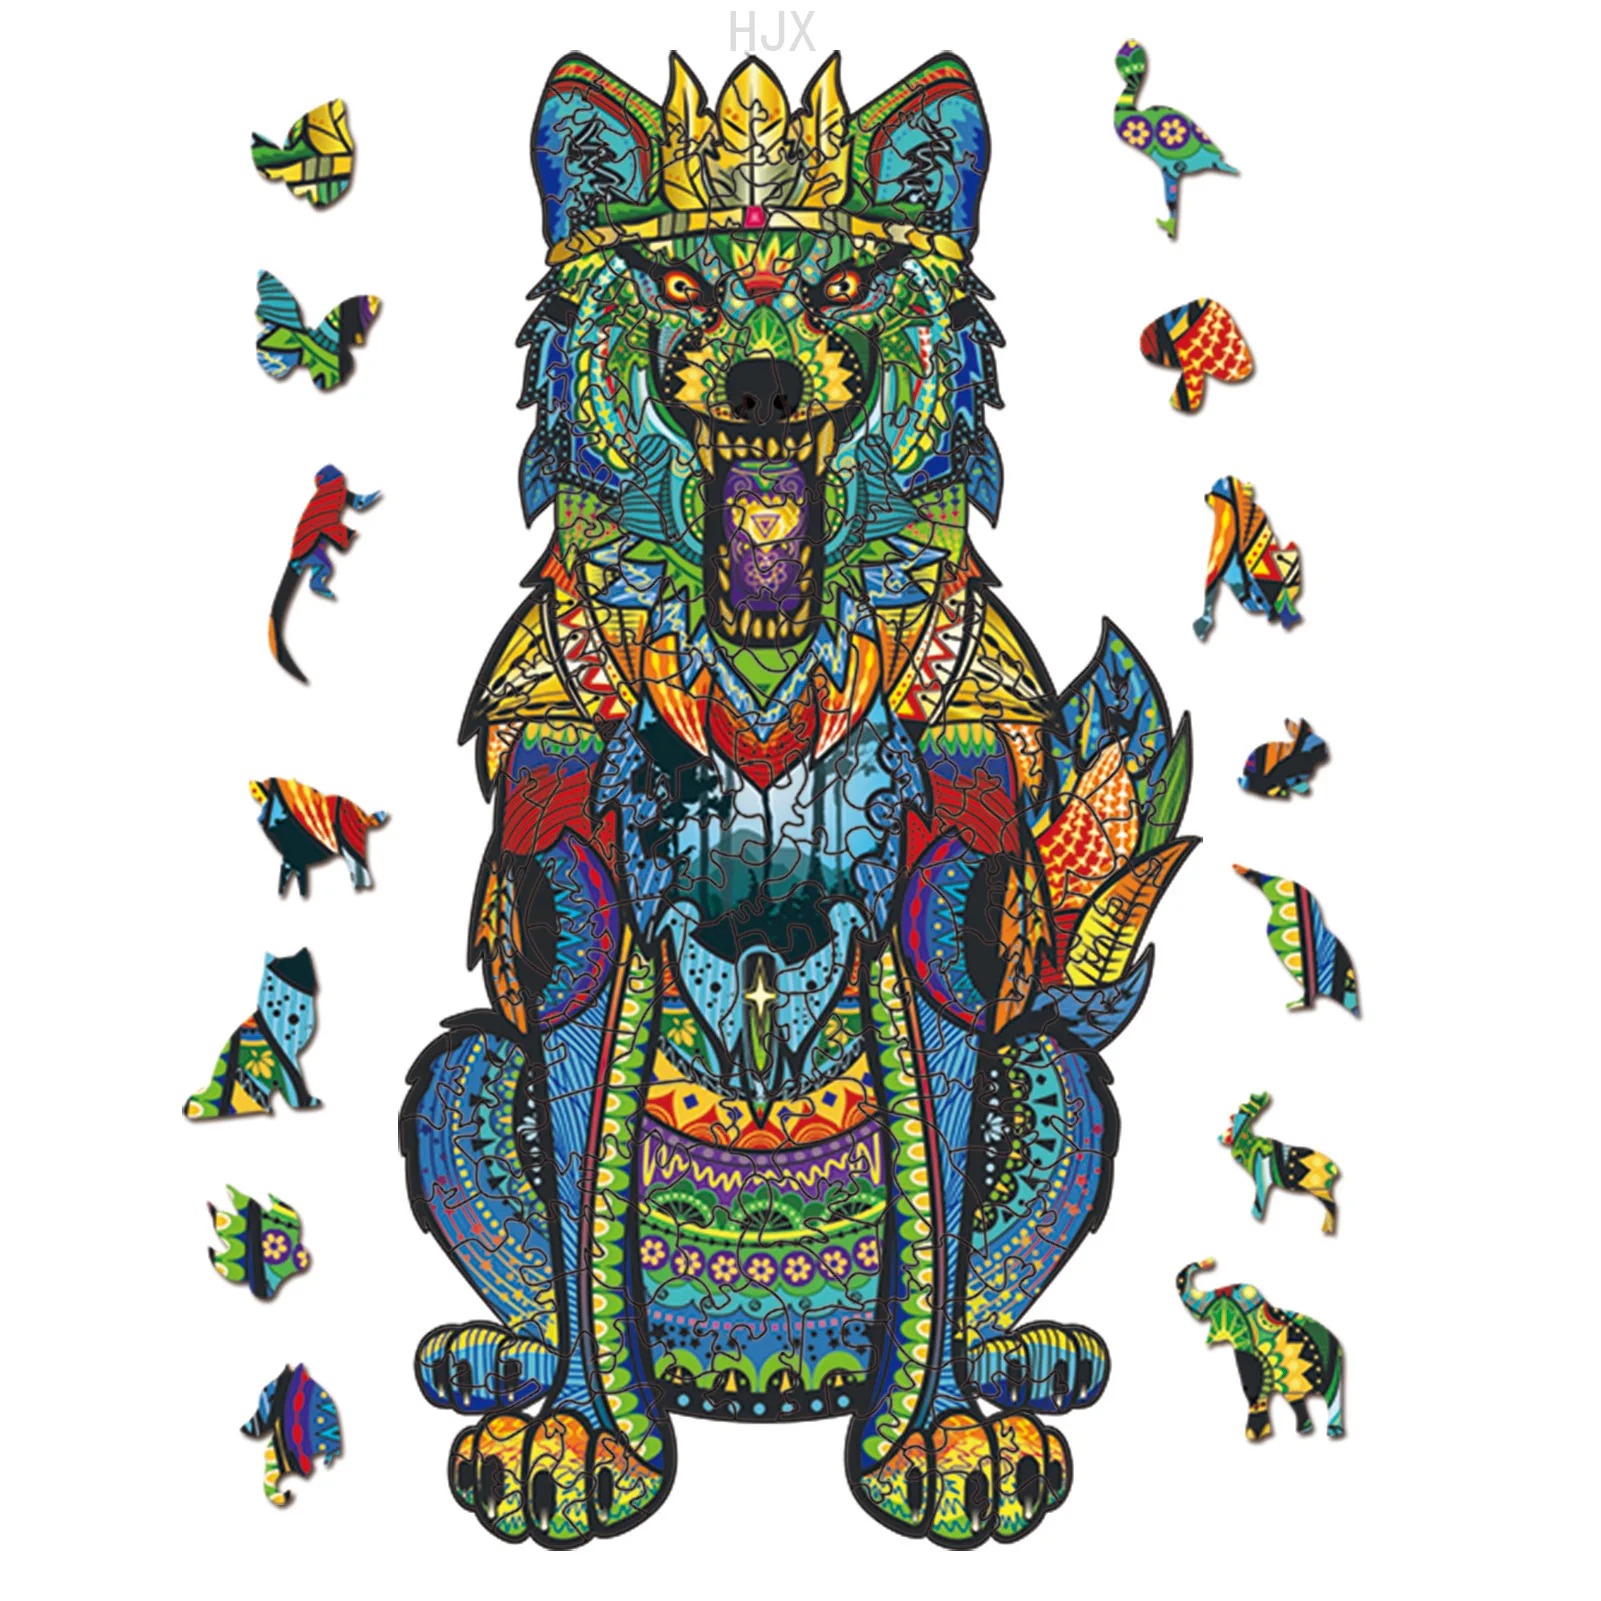 Wood Toys Wolf King Art Picture Jigsaw Puzzle for Kids Animal Wooden Puzzles Learning Educational Toy Boys Girls Children Adults